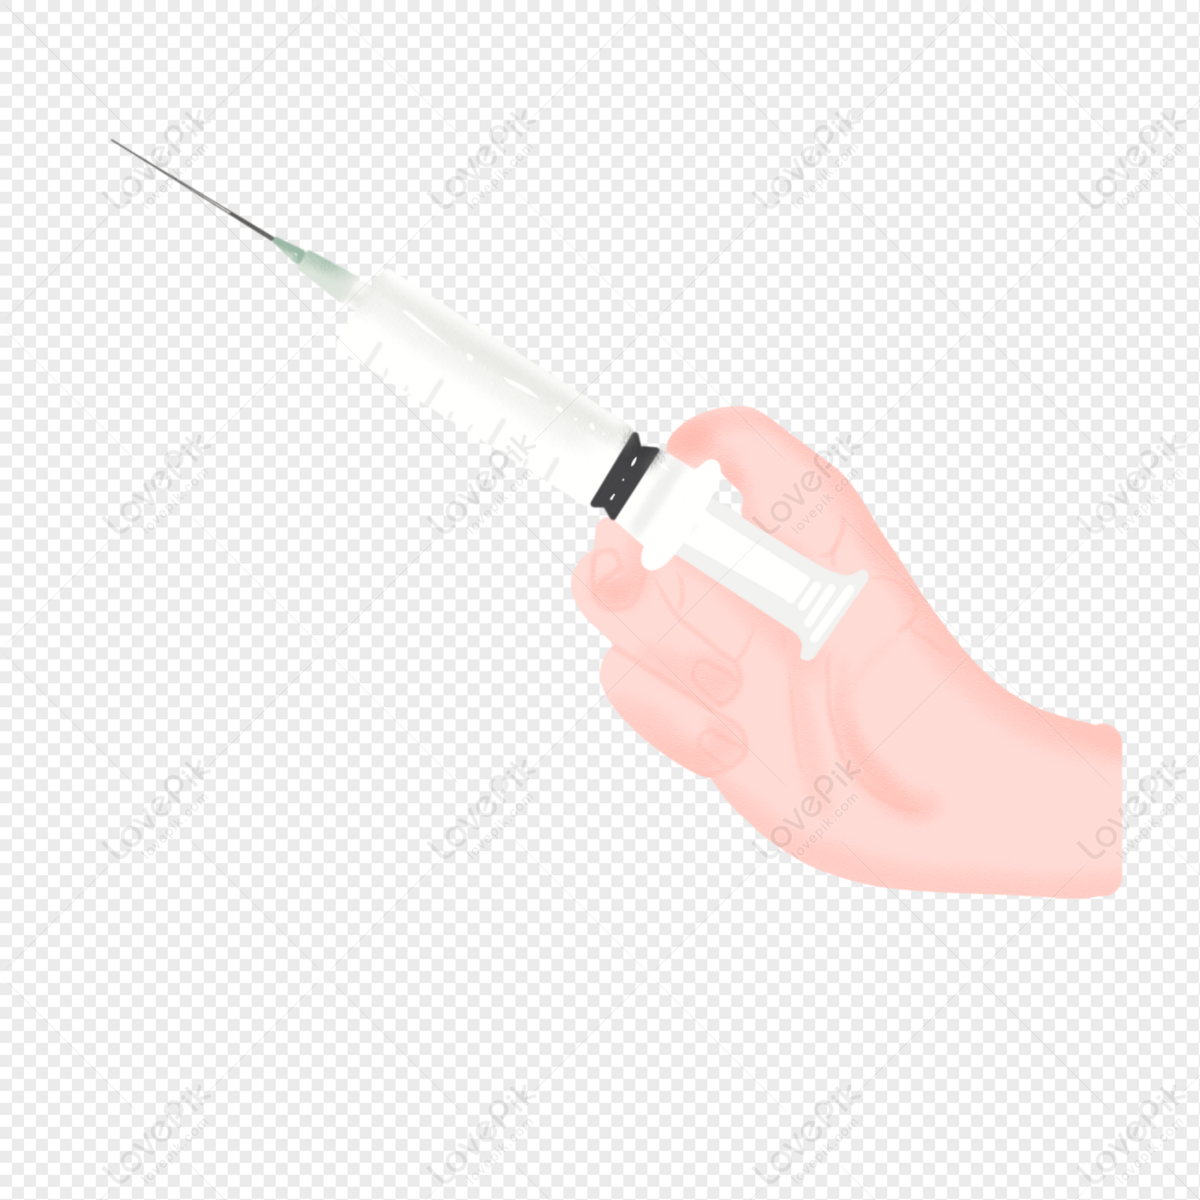 Hand Holding A Needle Free PNG And Clipart Image For Free Download ...